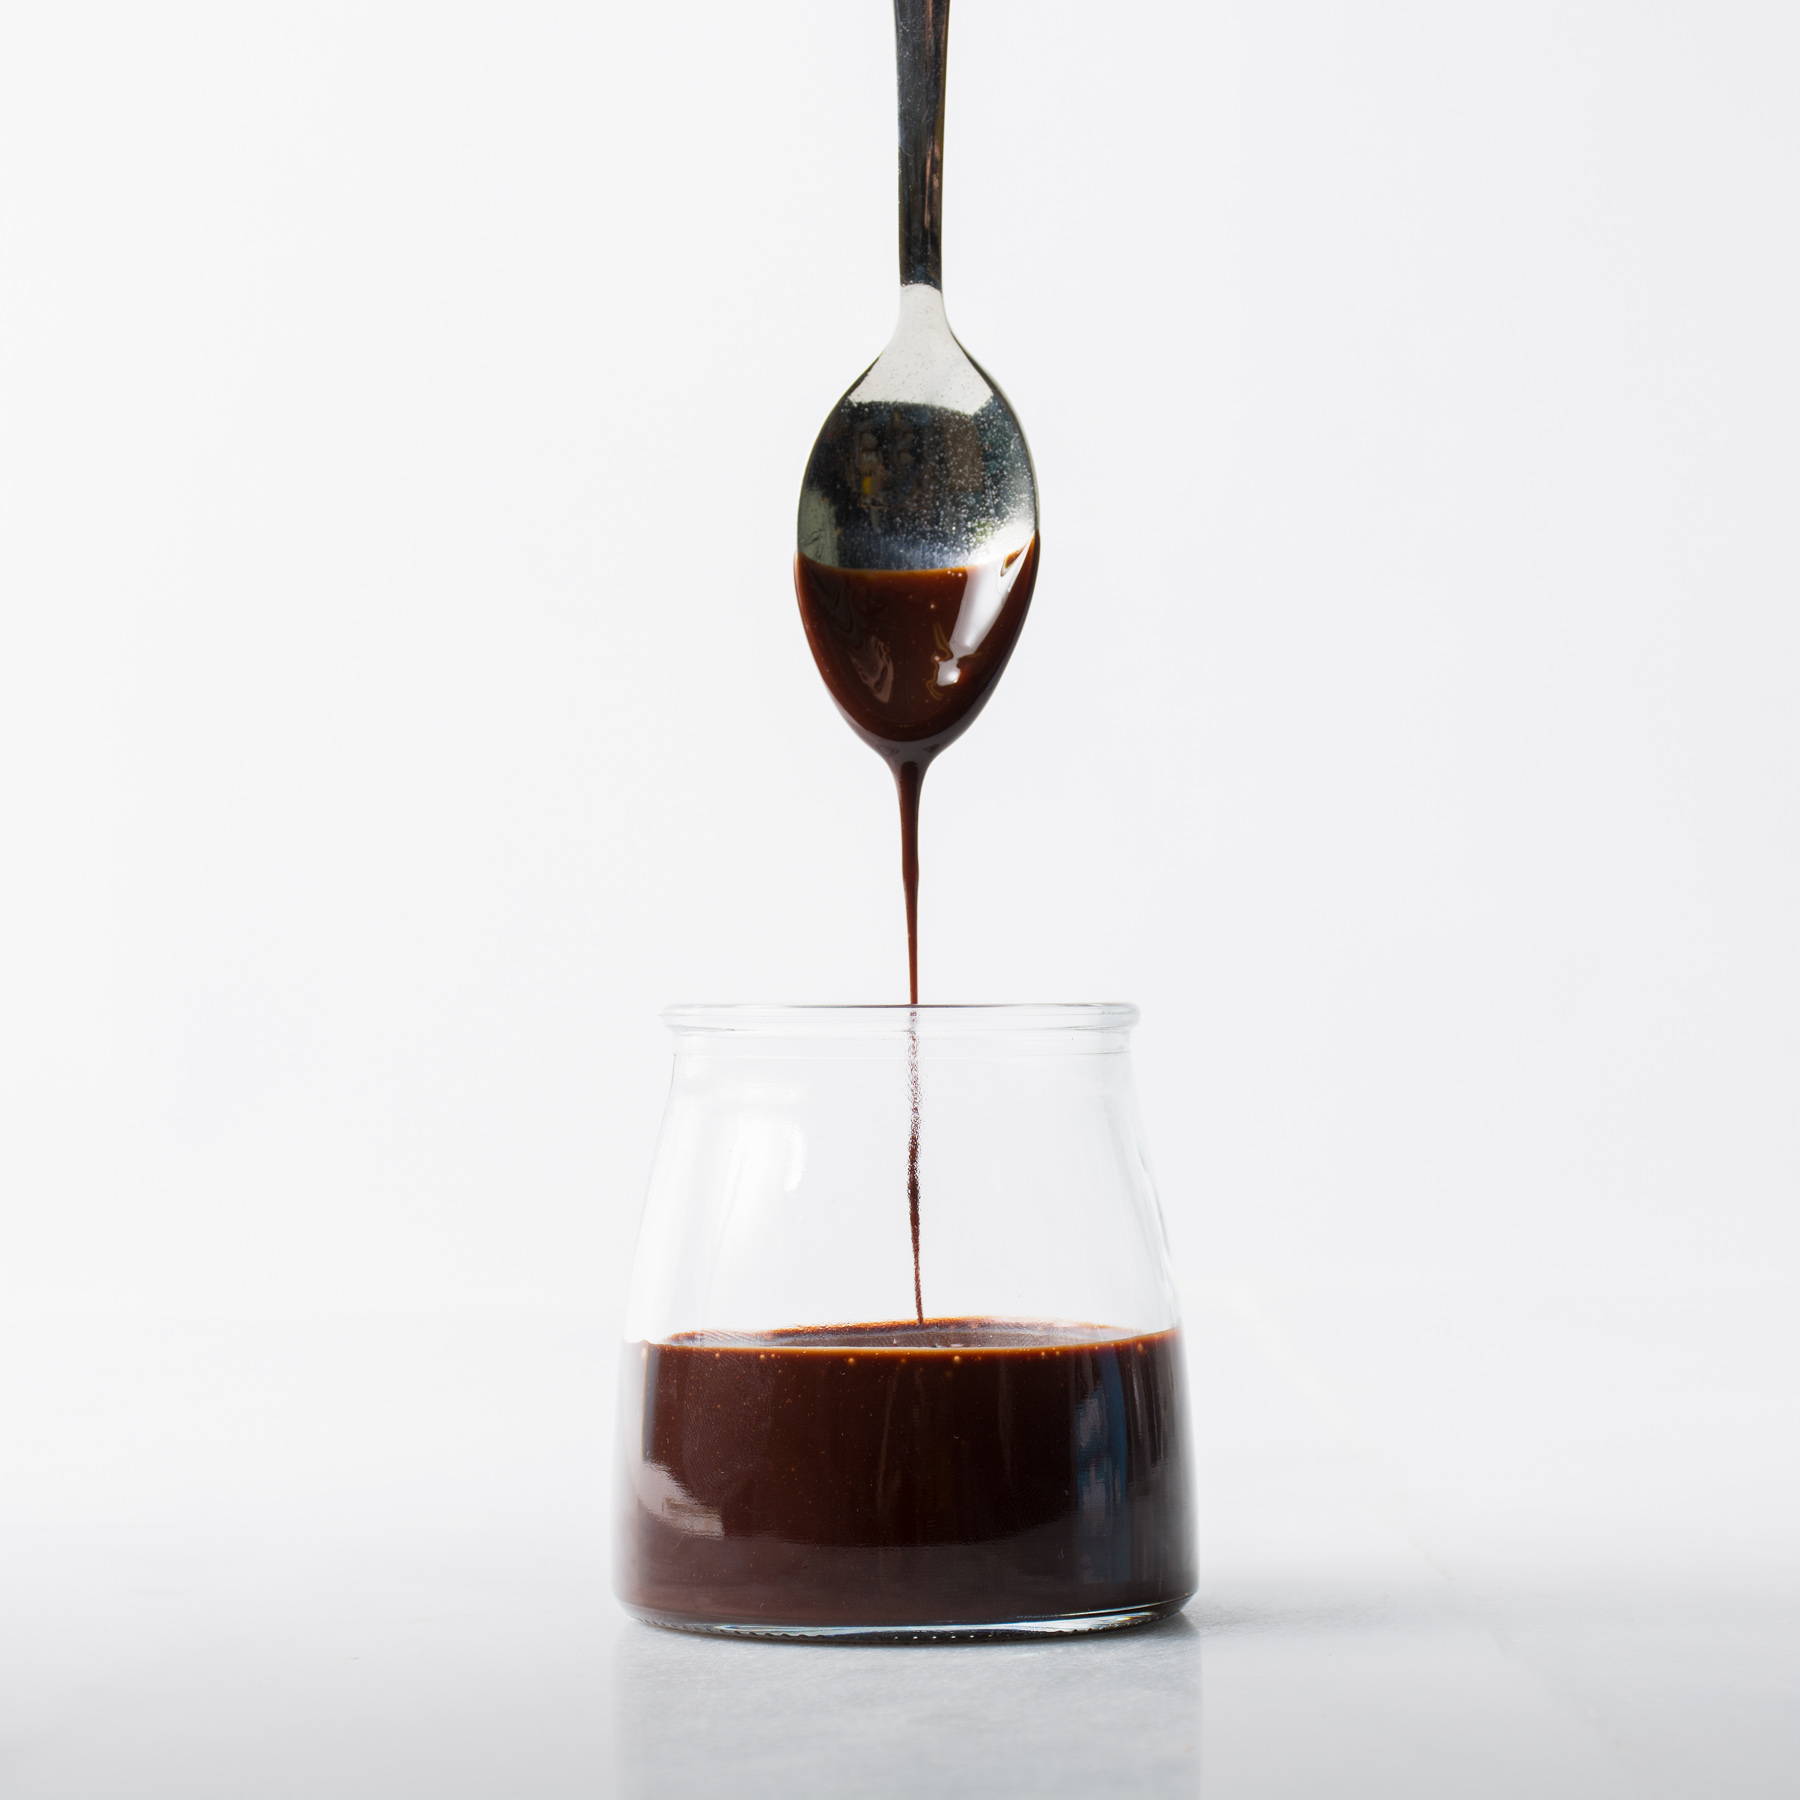 Chocolate Caramel Sauce dripping from a spoon